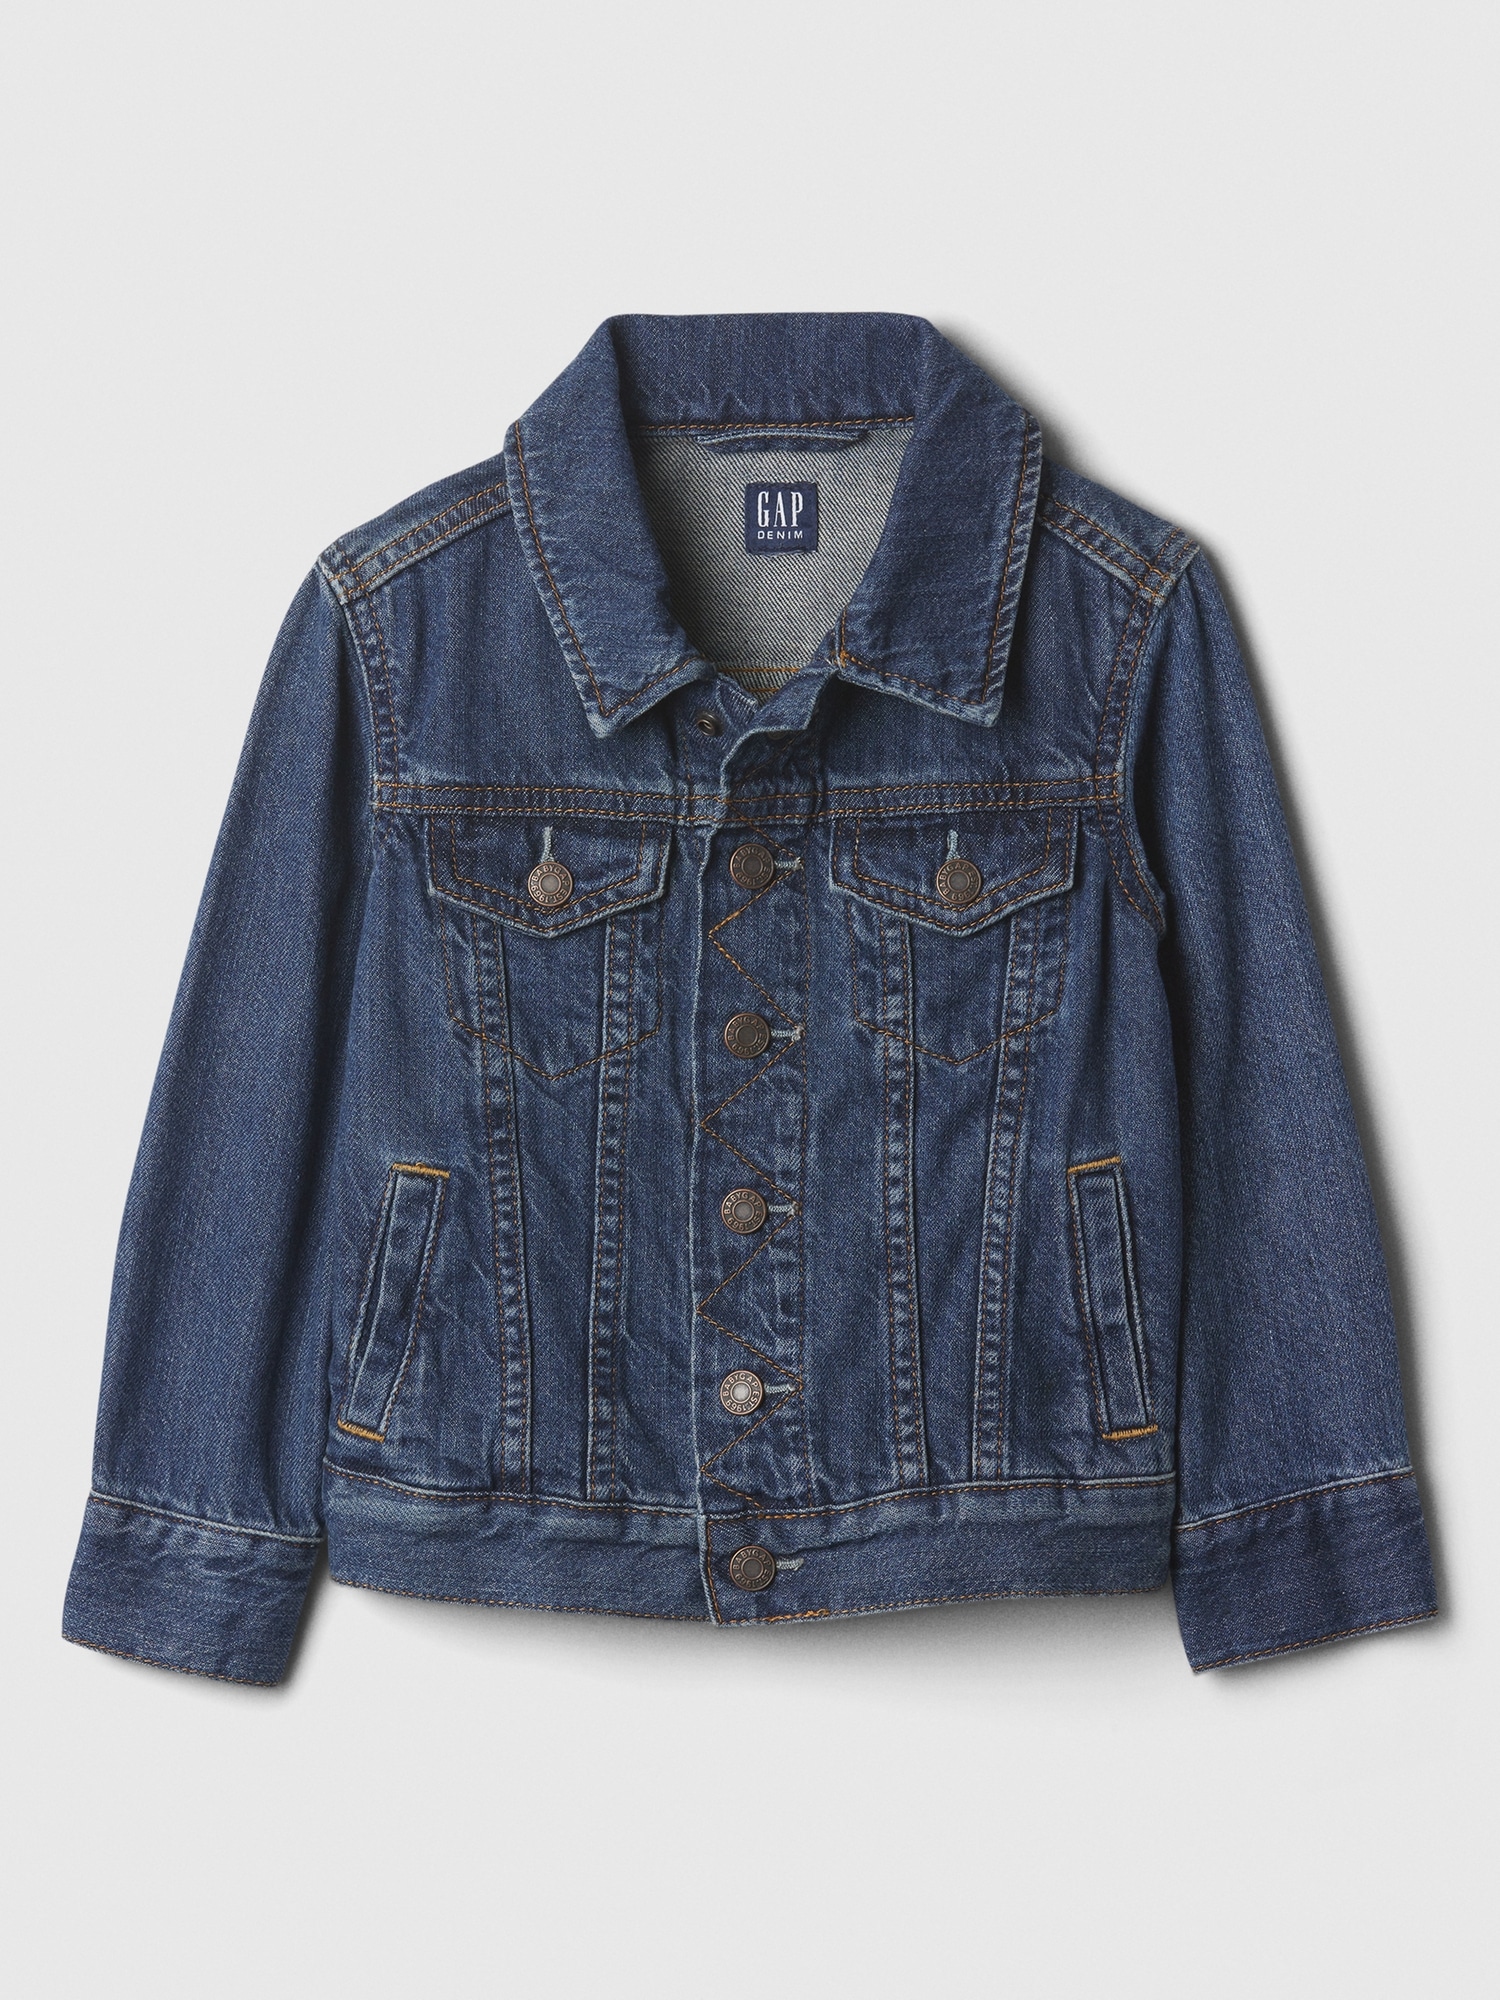 Exact Clothing - Our favourite women's items, including our #musthave denim  jackets are now available in ages 2 - 12 years. Your little girl will love  wearing it with favourite jeggings &